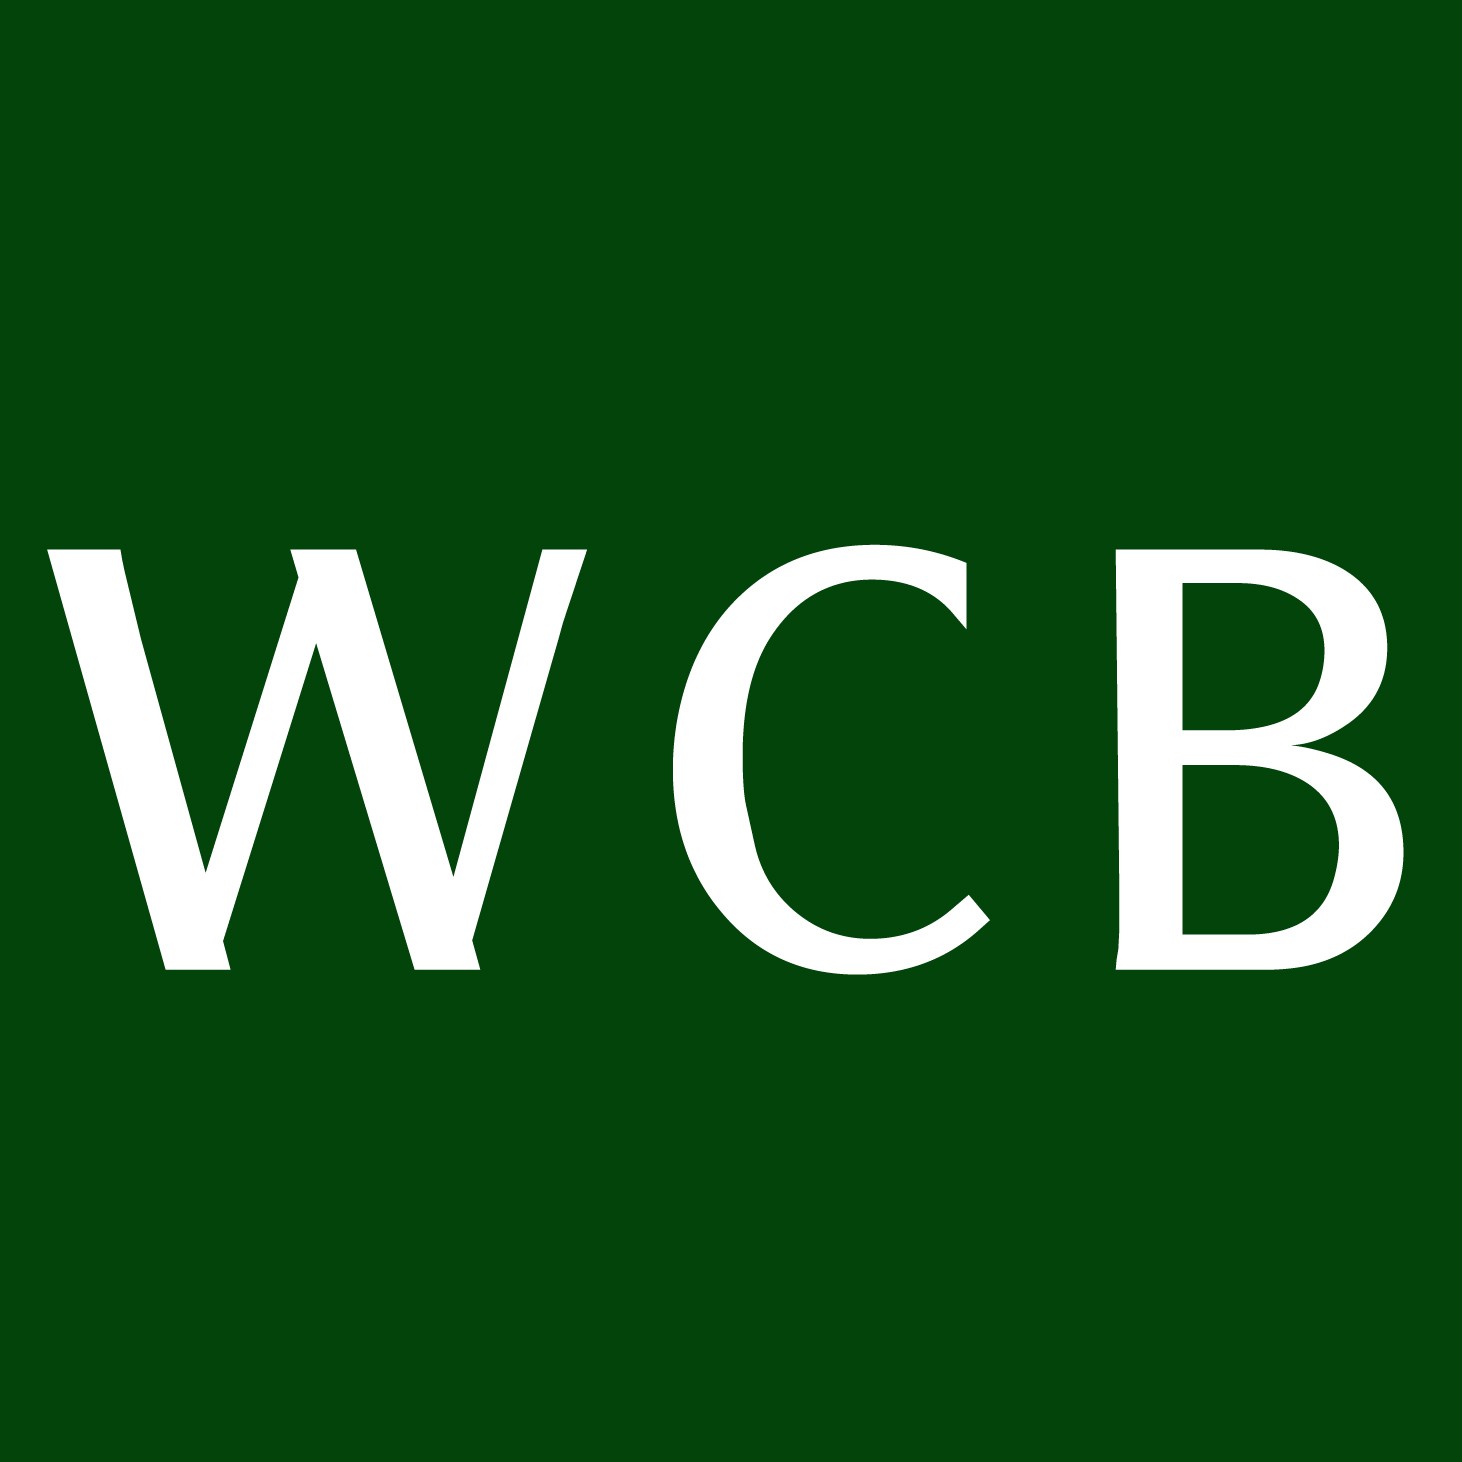 Wales Council of the Blind logo